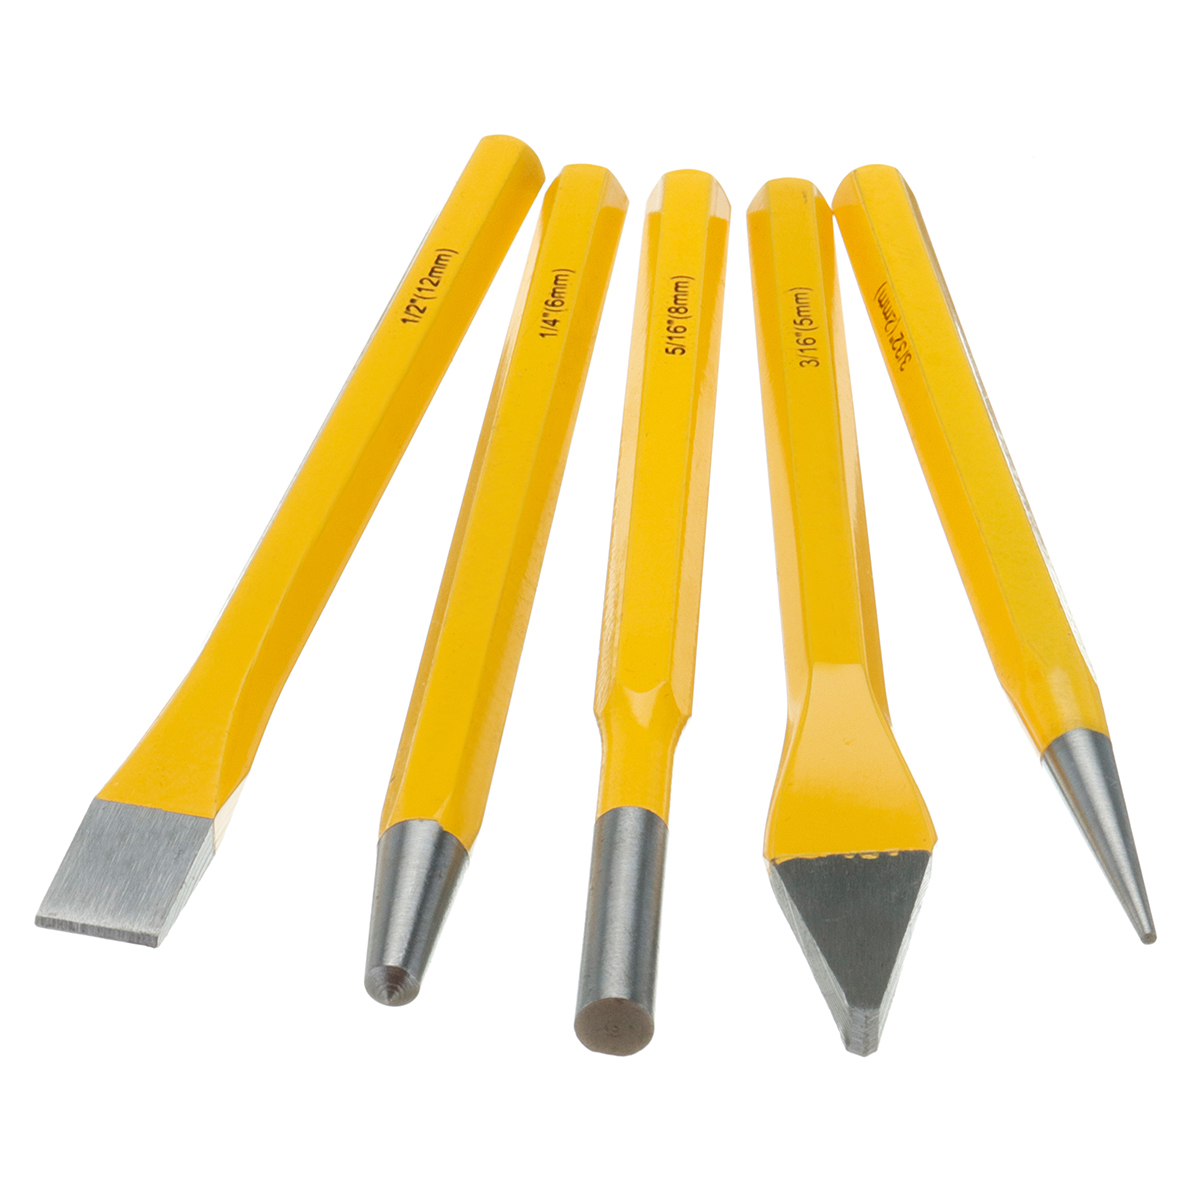 

5Pcs Chisel and Punch Set Gunsmith Drift Pins Woodworking Carving Tools Kit Wood Carving Chisel Set